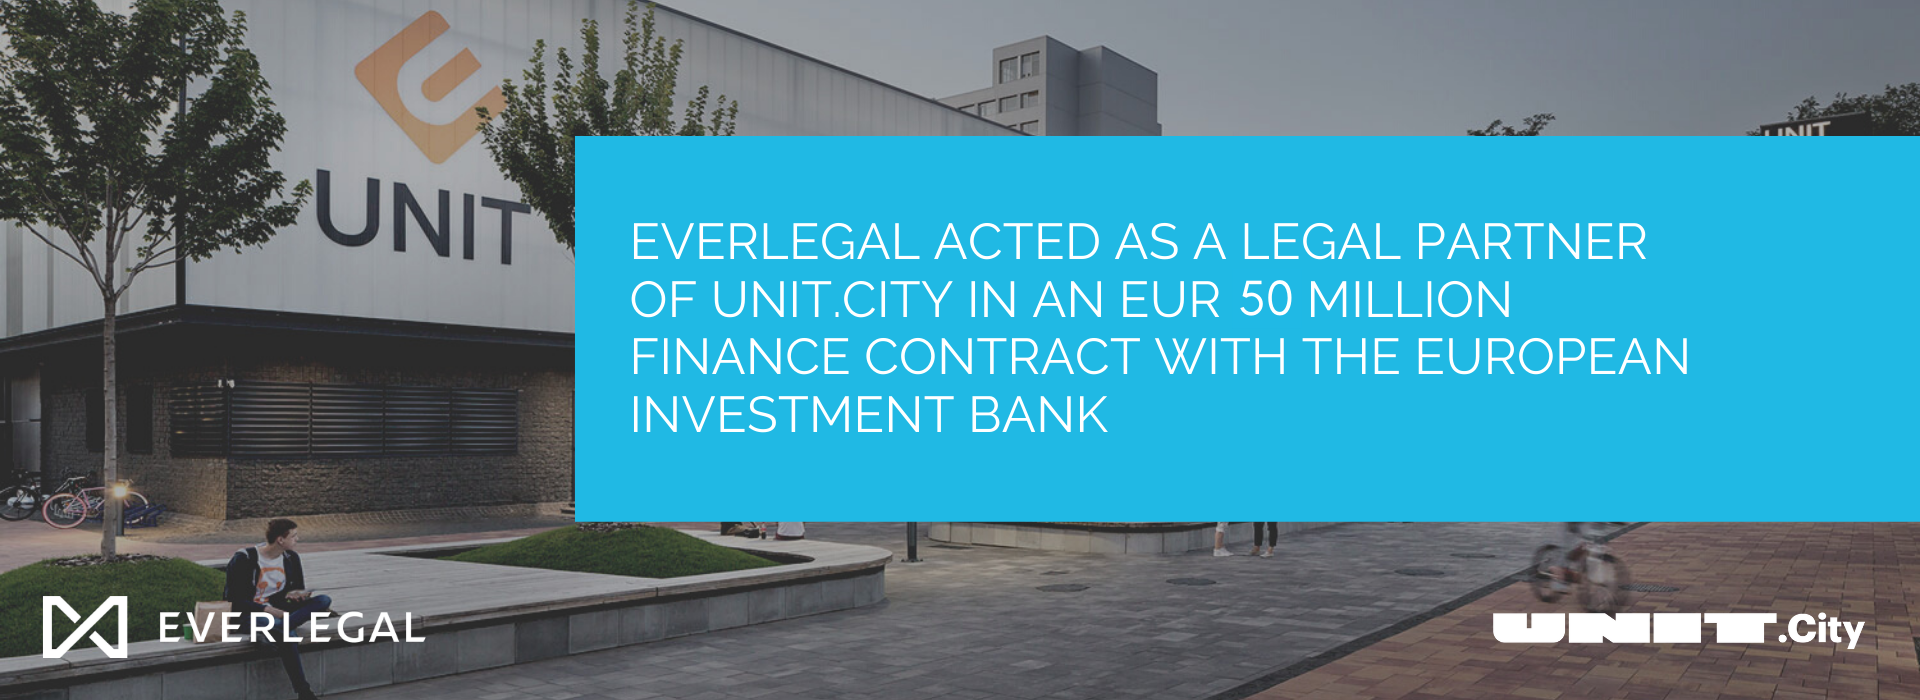 EVERLEGAL Acted as a Legal Partner of UNIT.City in an EUR 50 Million Finance Contract with the European Investment Bank (EIB)